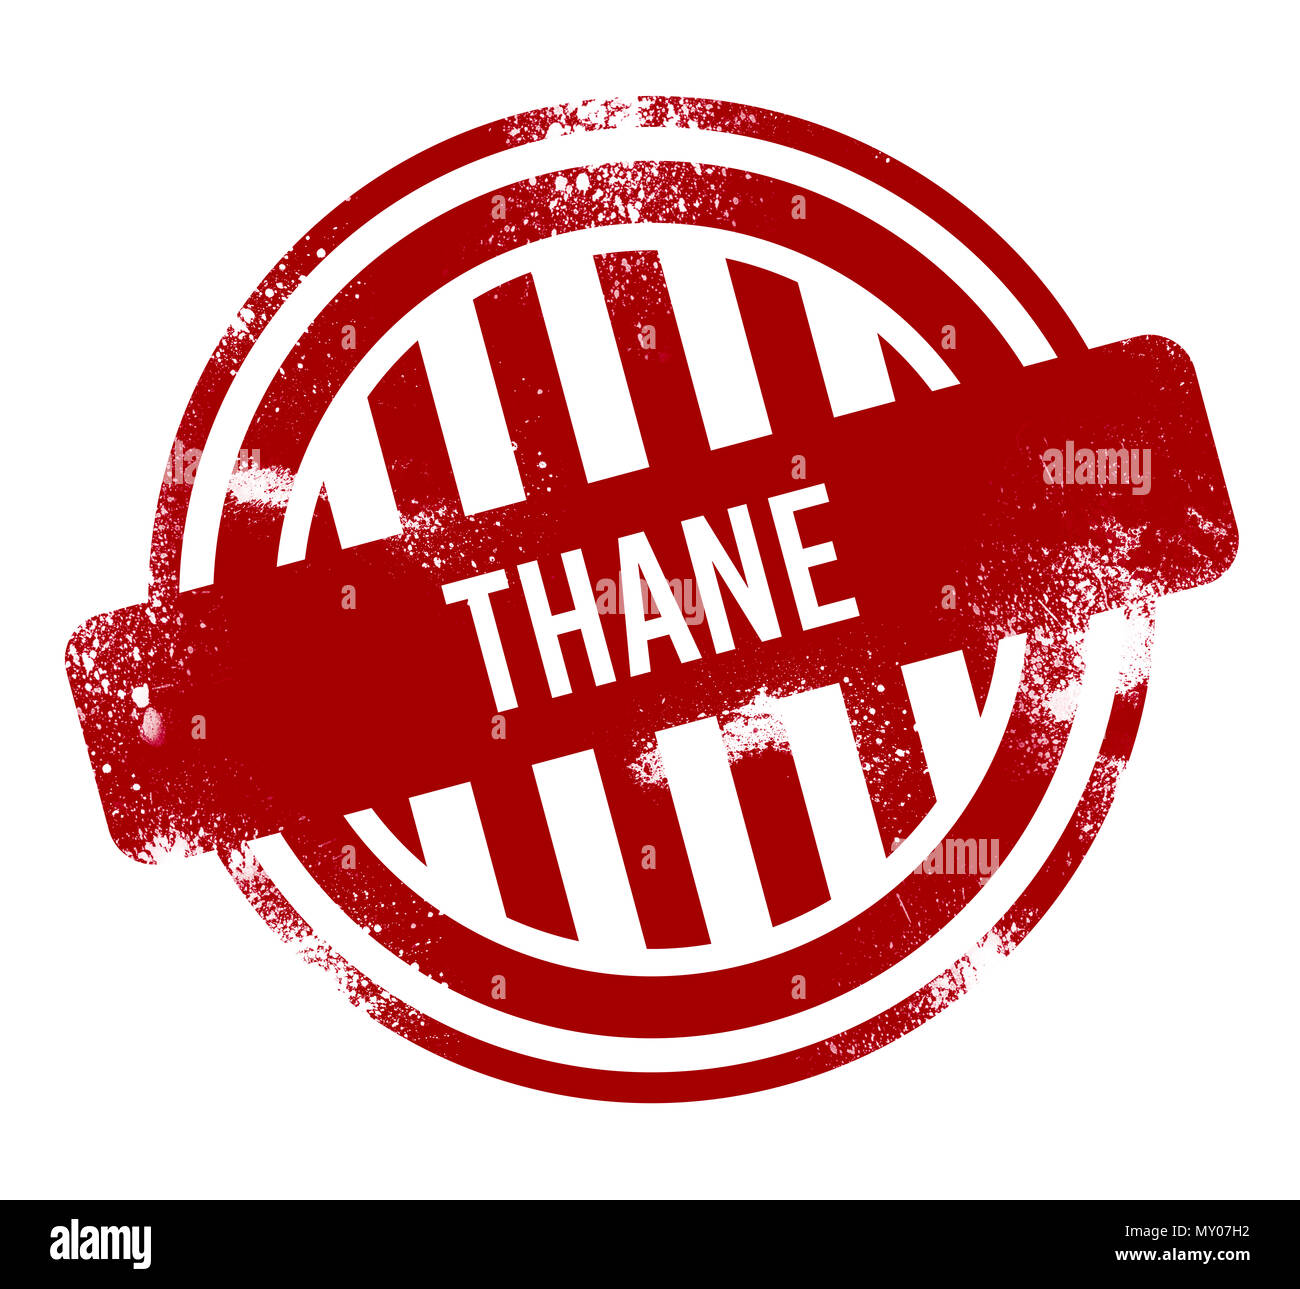 Thane - grunge stamp, bouton rouge Banque D'Images